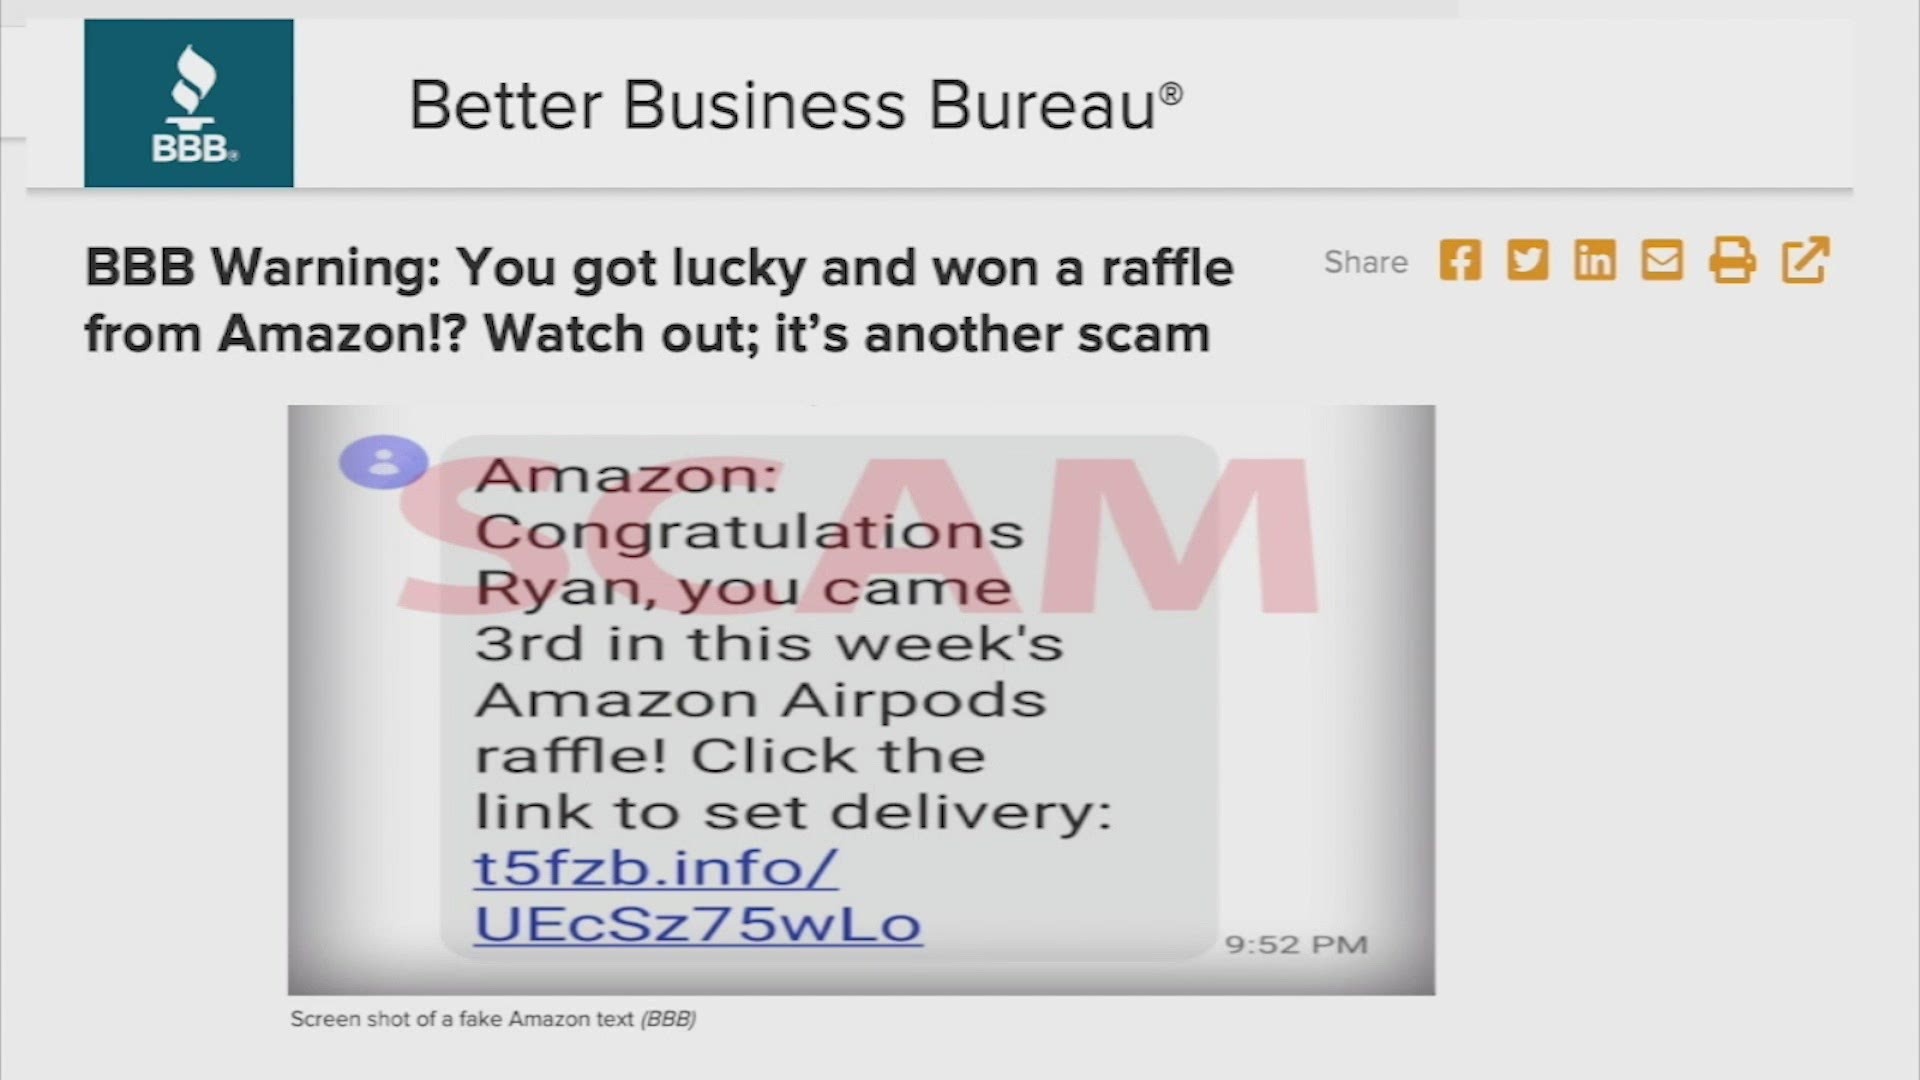 The Better Business Bureau is issuing a warning about this Amazon text scam after hundreds of recent complaints nationwide.